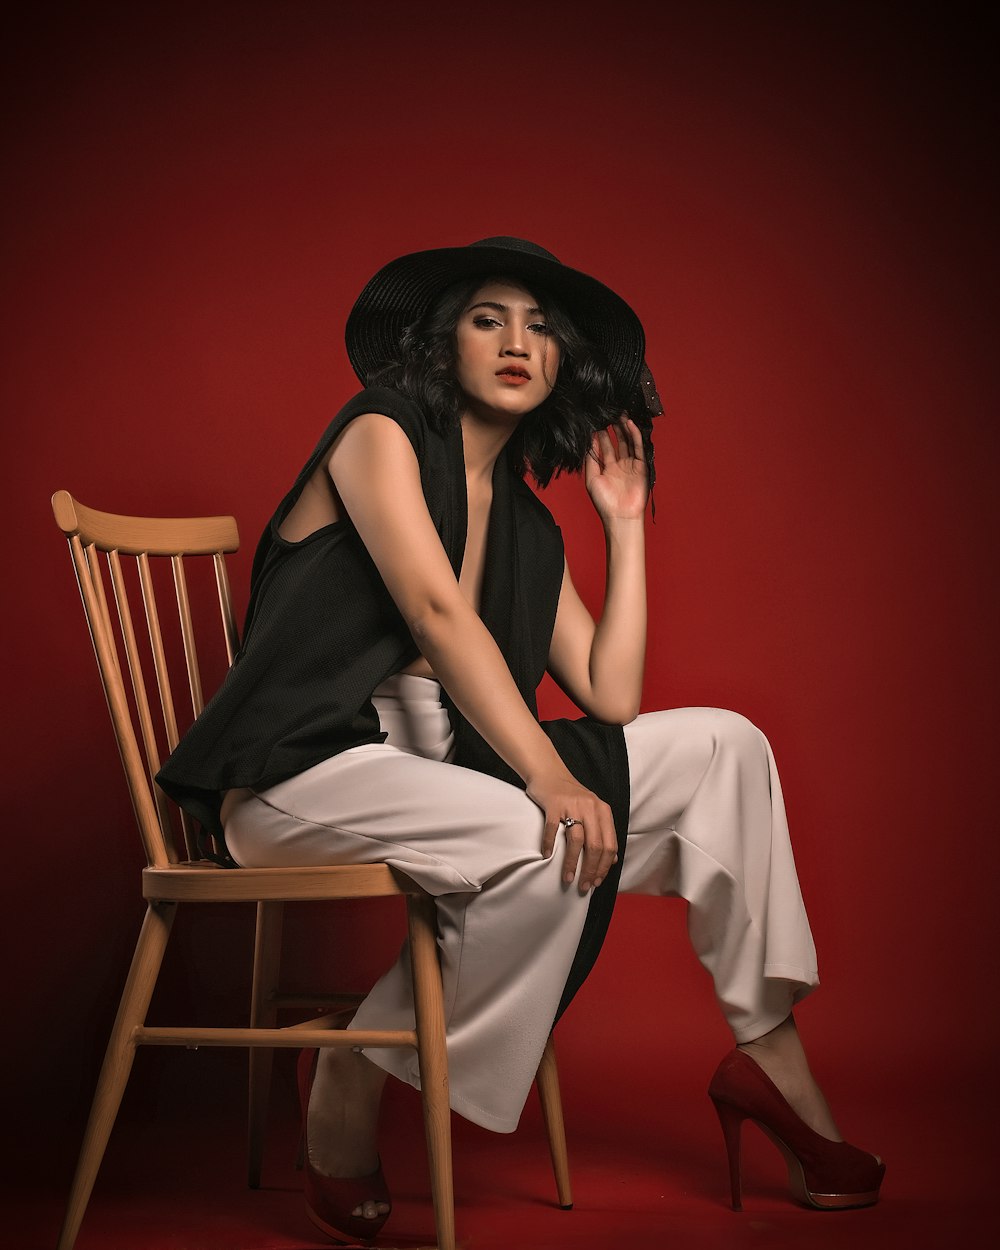 a woman sitting on a chair wearing a black hat